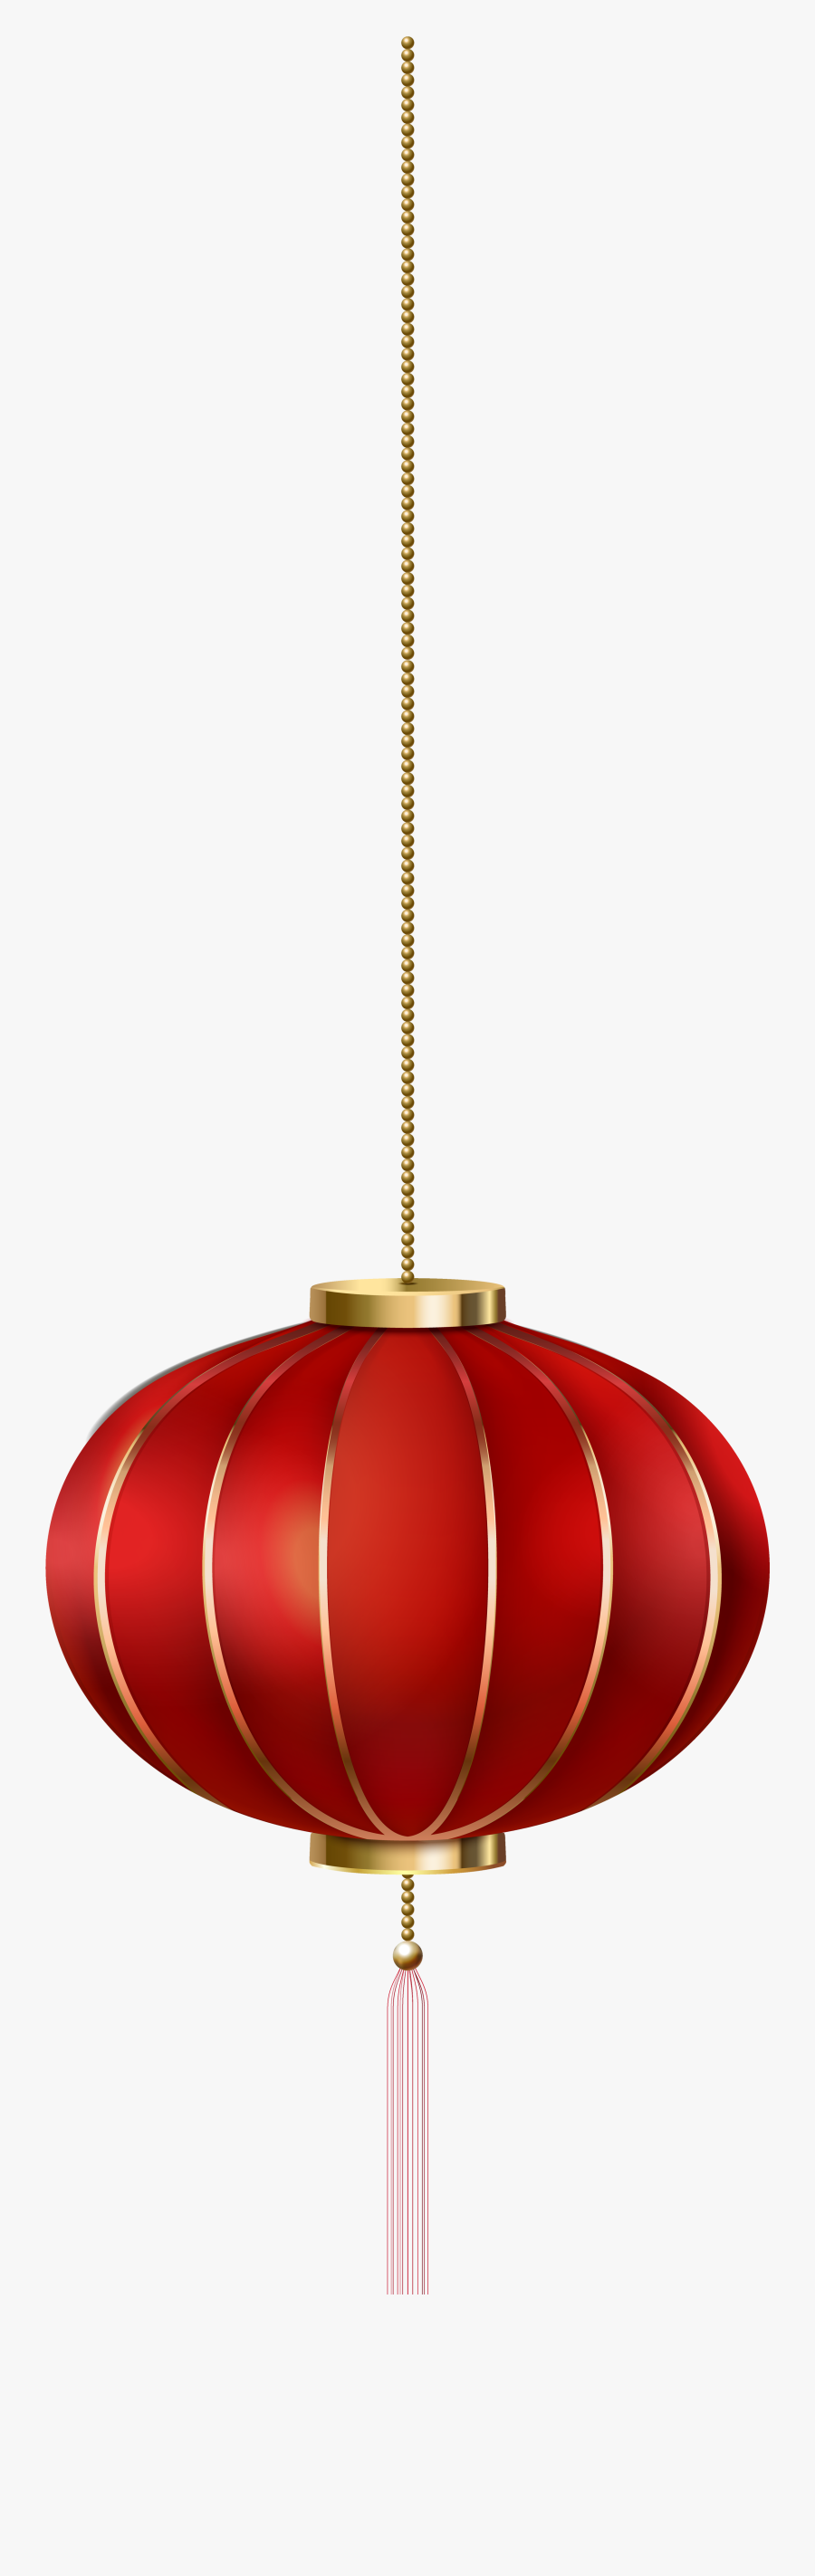 Red Chinese Lantern Png Clipart - Lampshade, Transparent Clipart